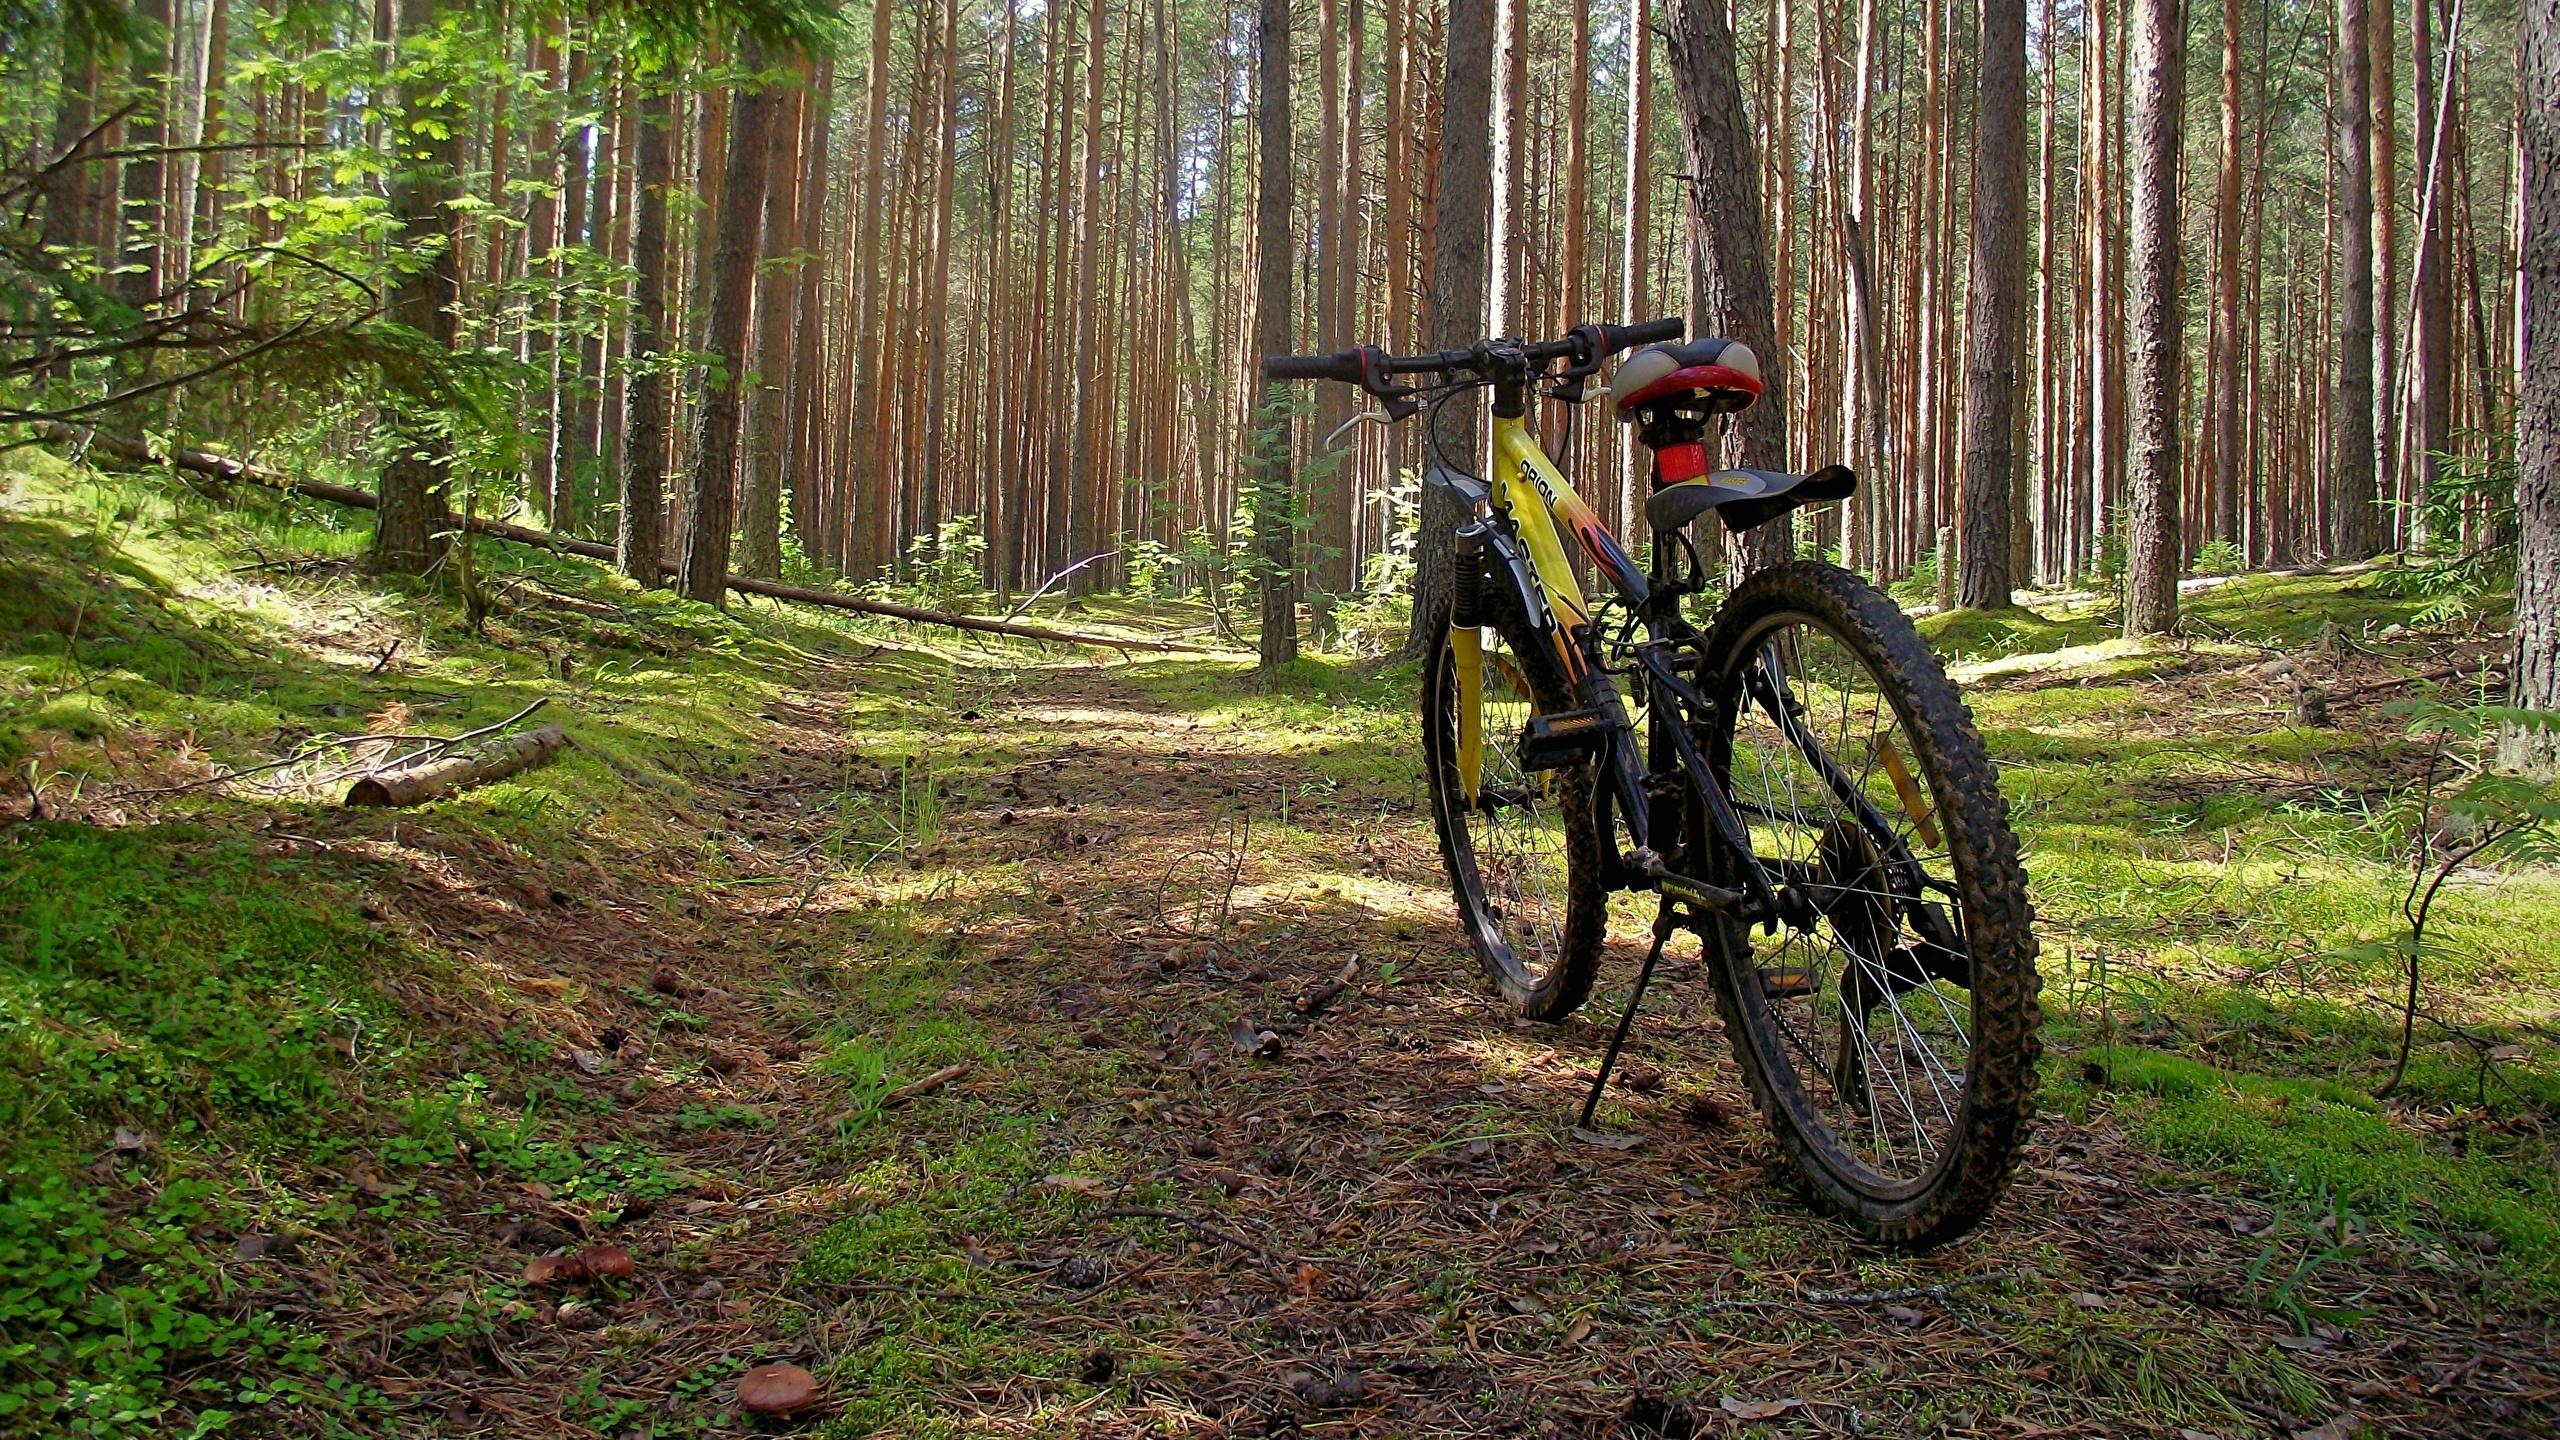 Desktop Wallpaper Bicycle Nature forest 2560x1440